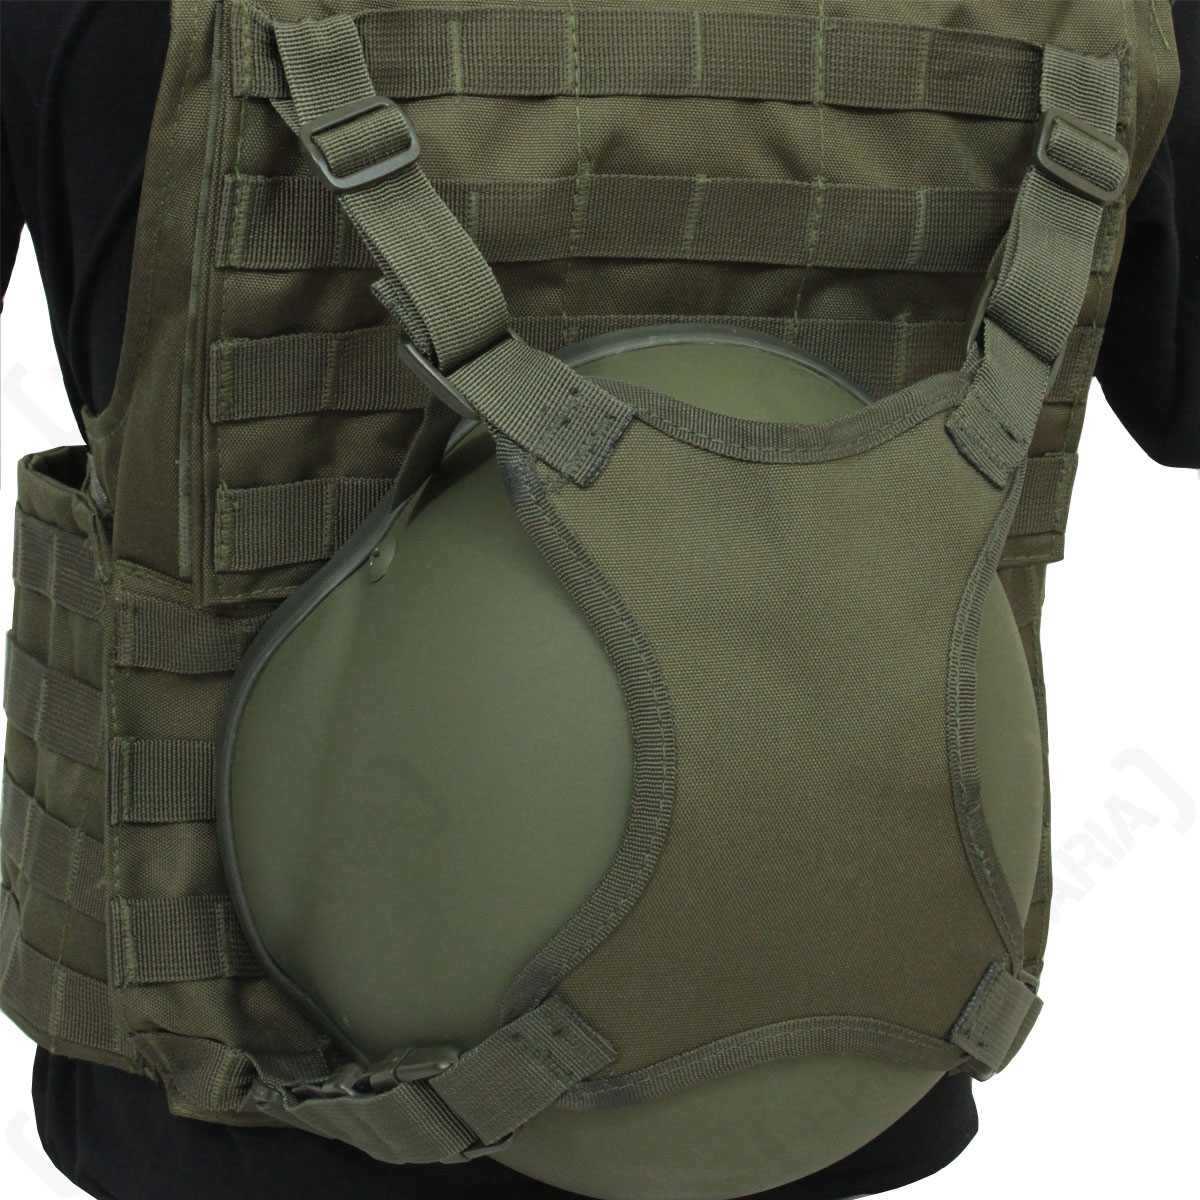 MOLLE Webbing Carrier Strap Airsoft Army Cadets Olive Green Helmet Carry Strap 